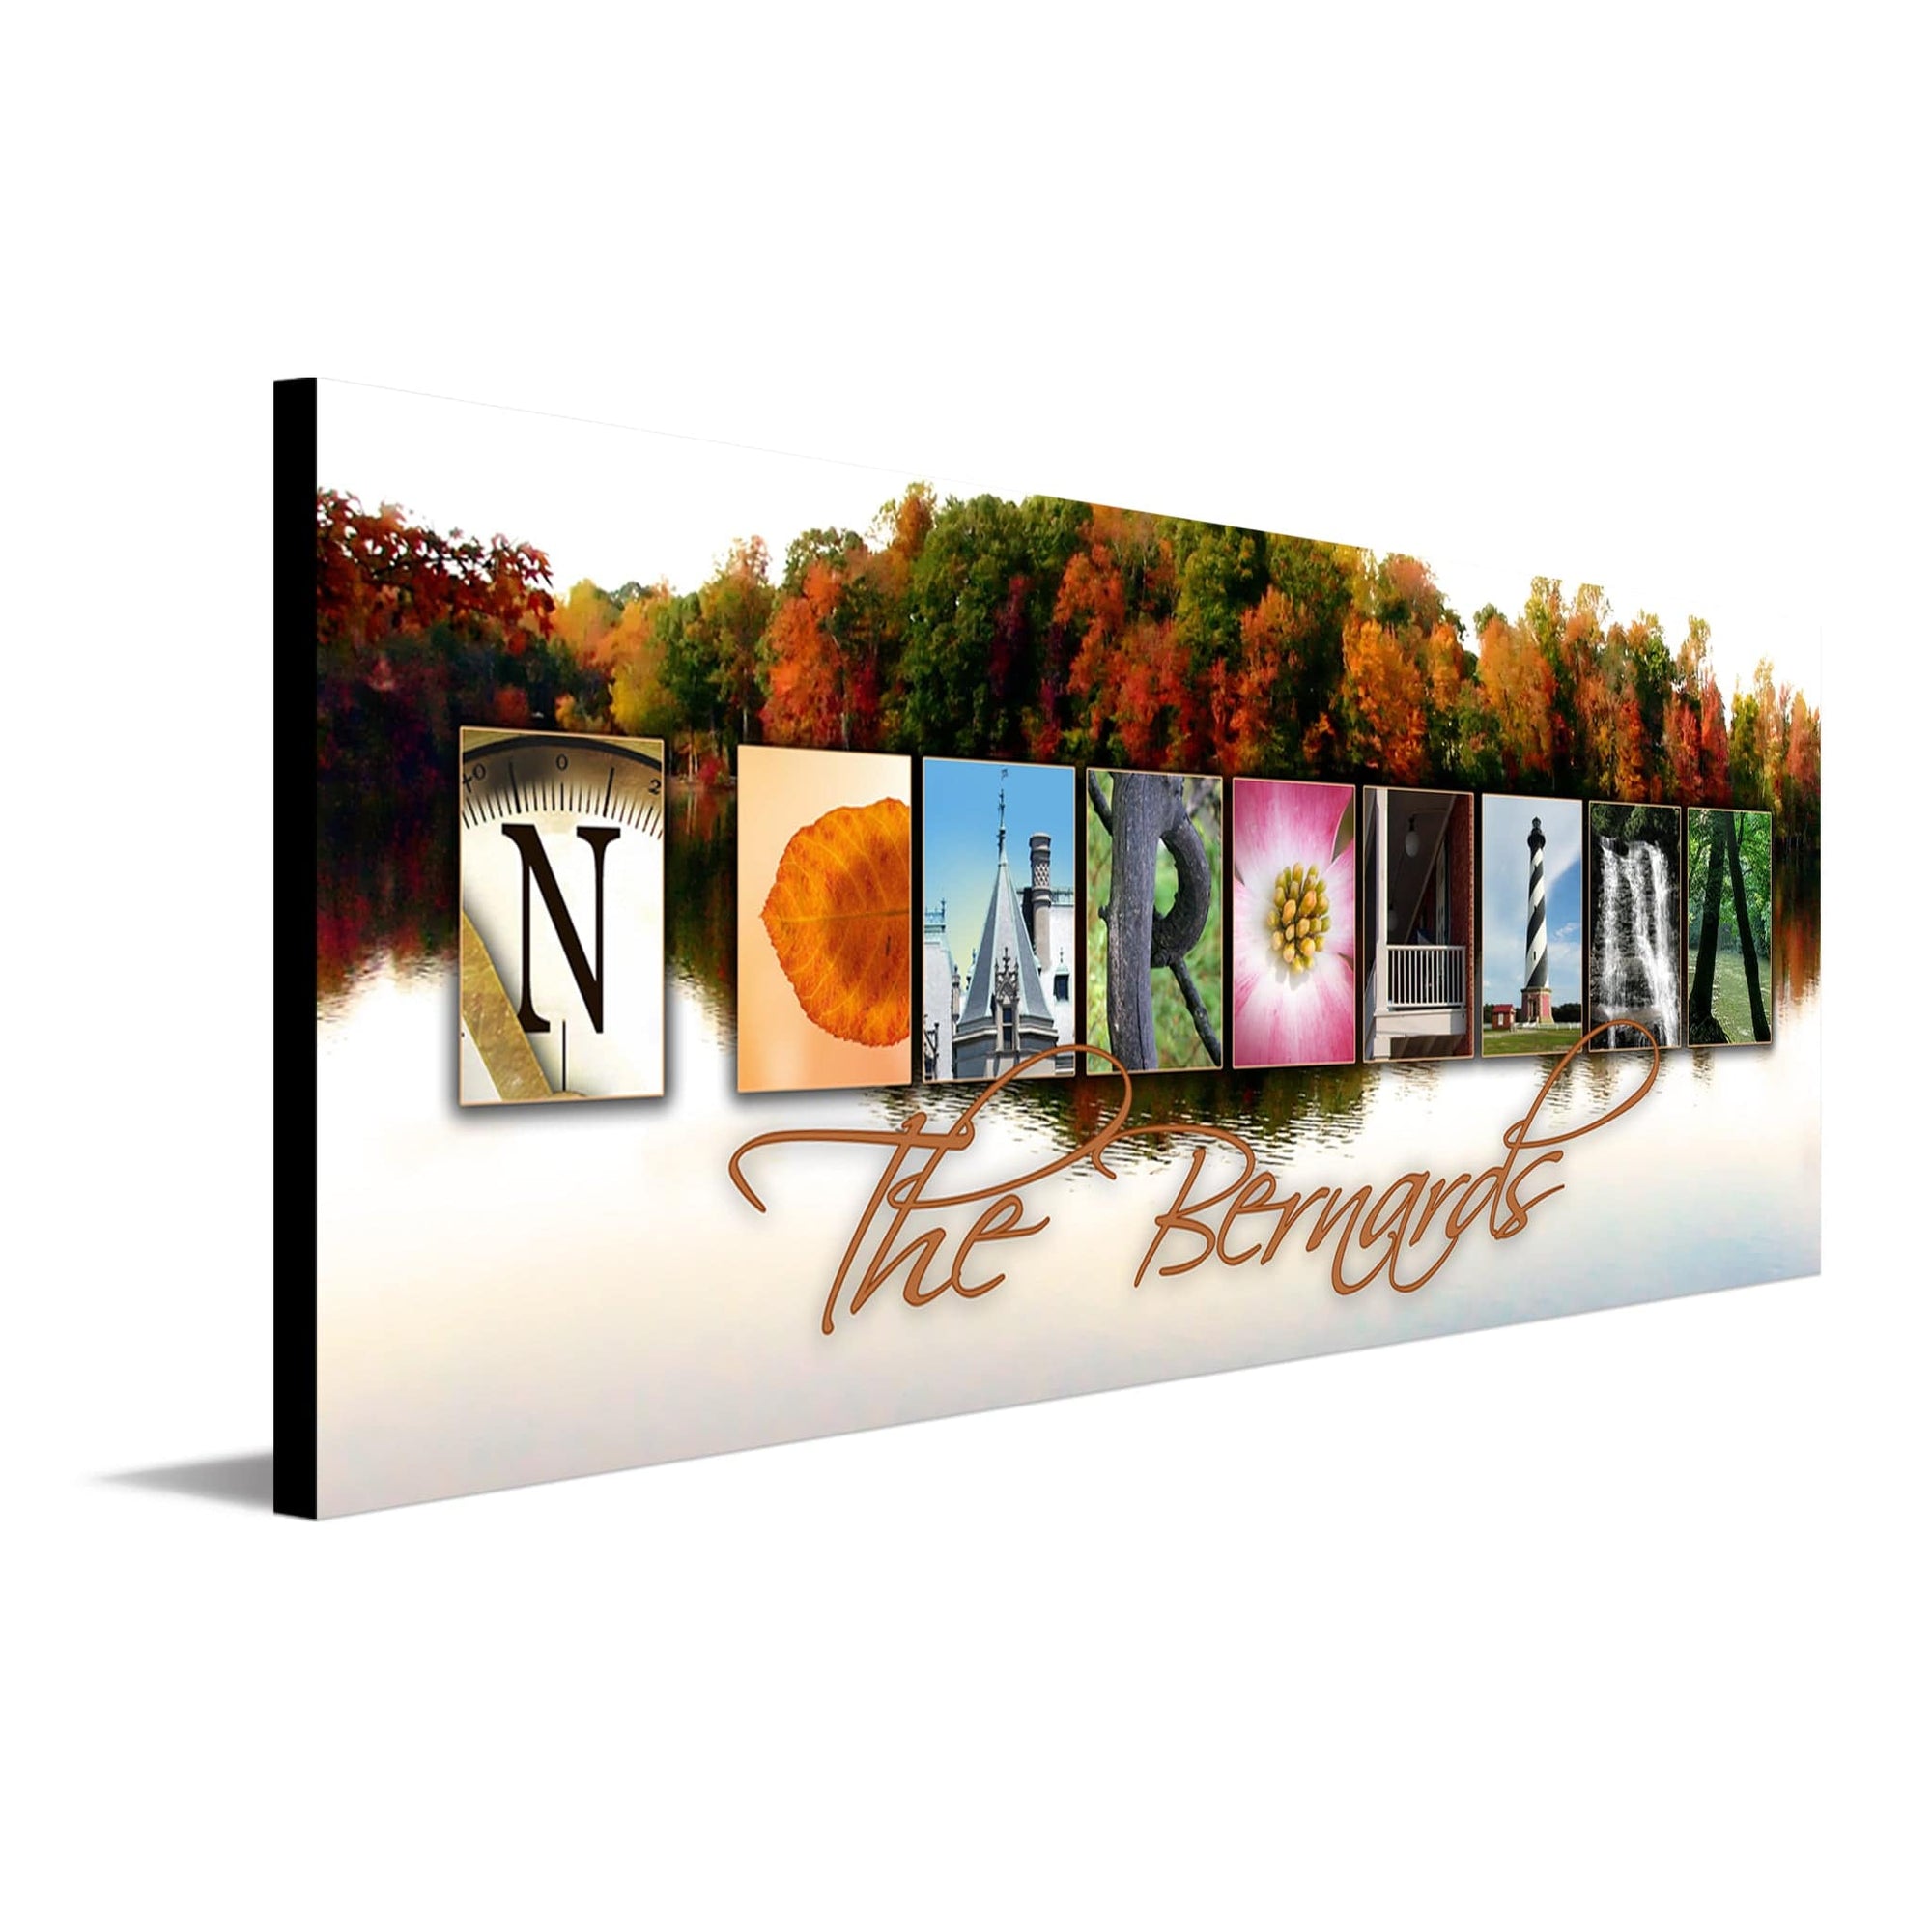 North Carolina state art using images from the state to spell the words North Carolina - Personal-Prints